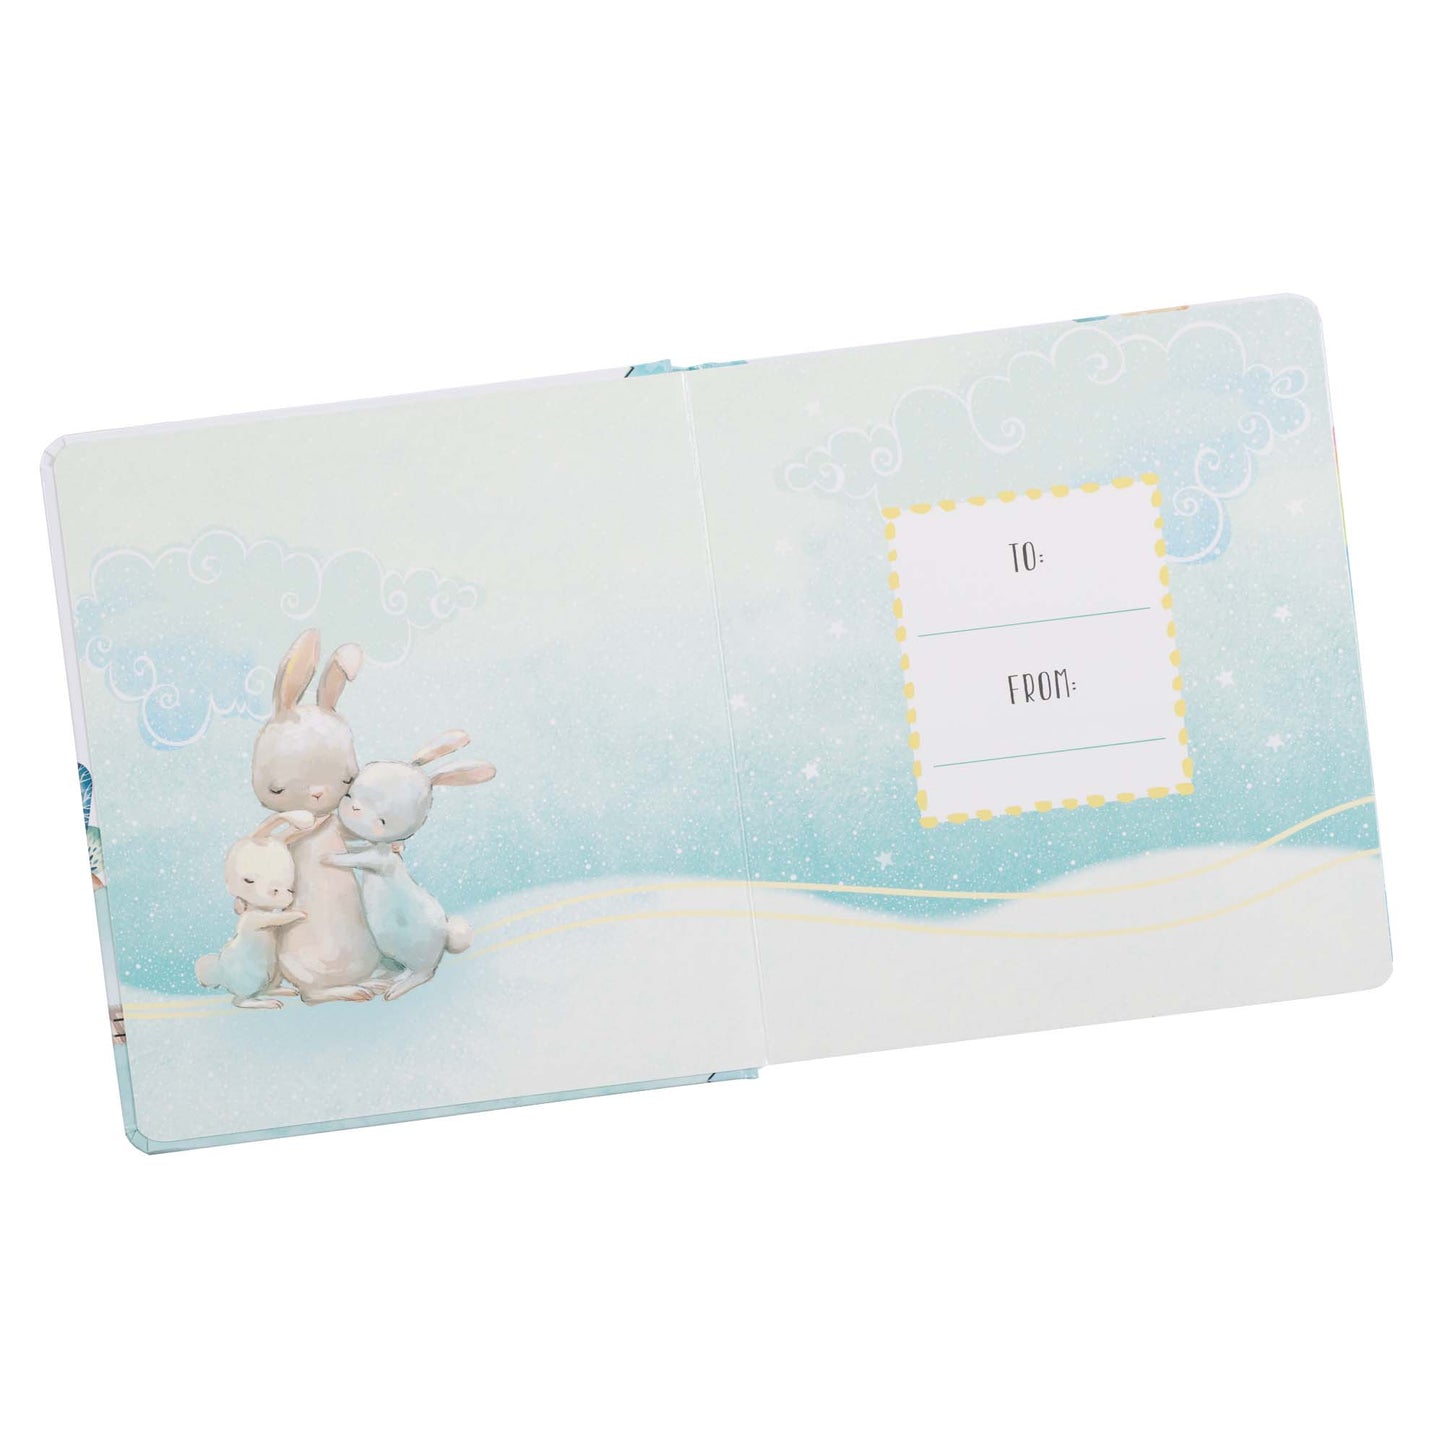 My LullaBible for Boys Bible Storybook - The Christian Gift Company